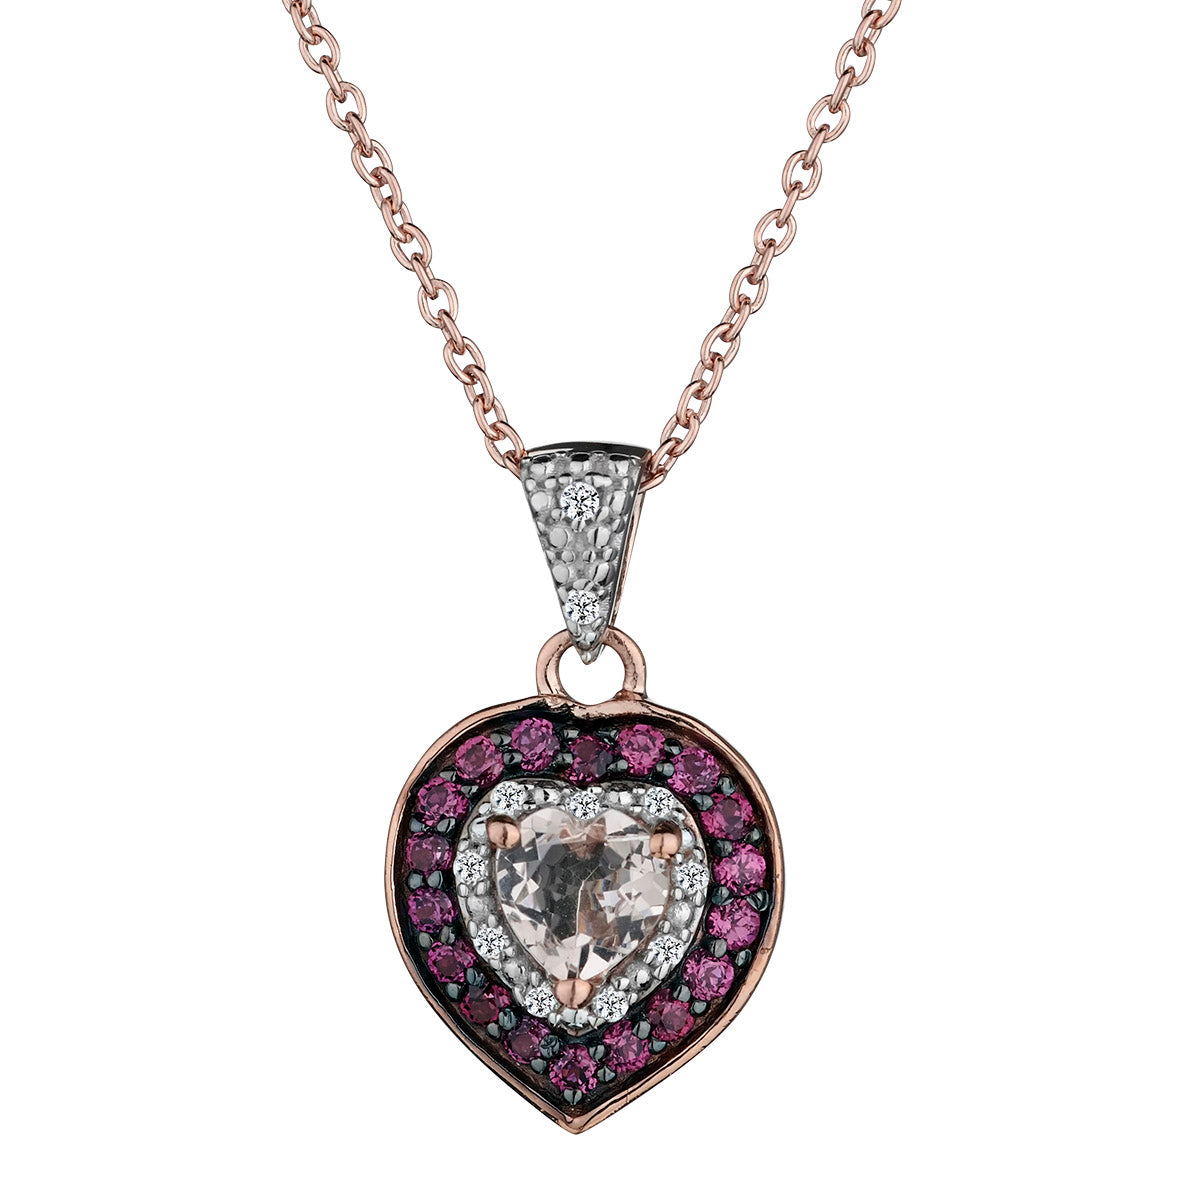 1.36 Carat Genuine Morganite and Rhodolite Heart Pendant, Sterling Silver (14kt Rose Gold Plated).......................NOW